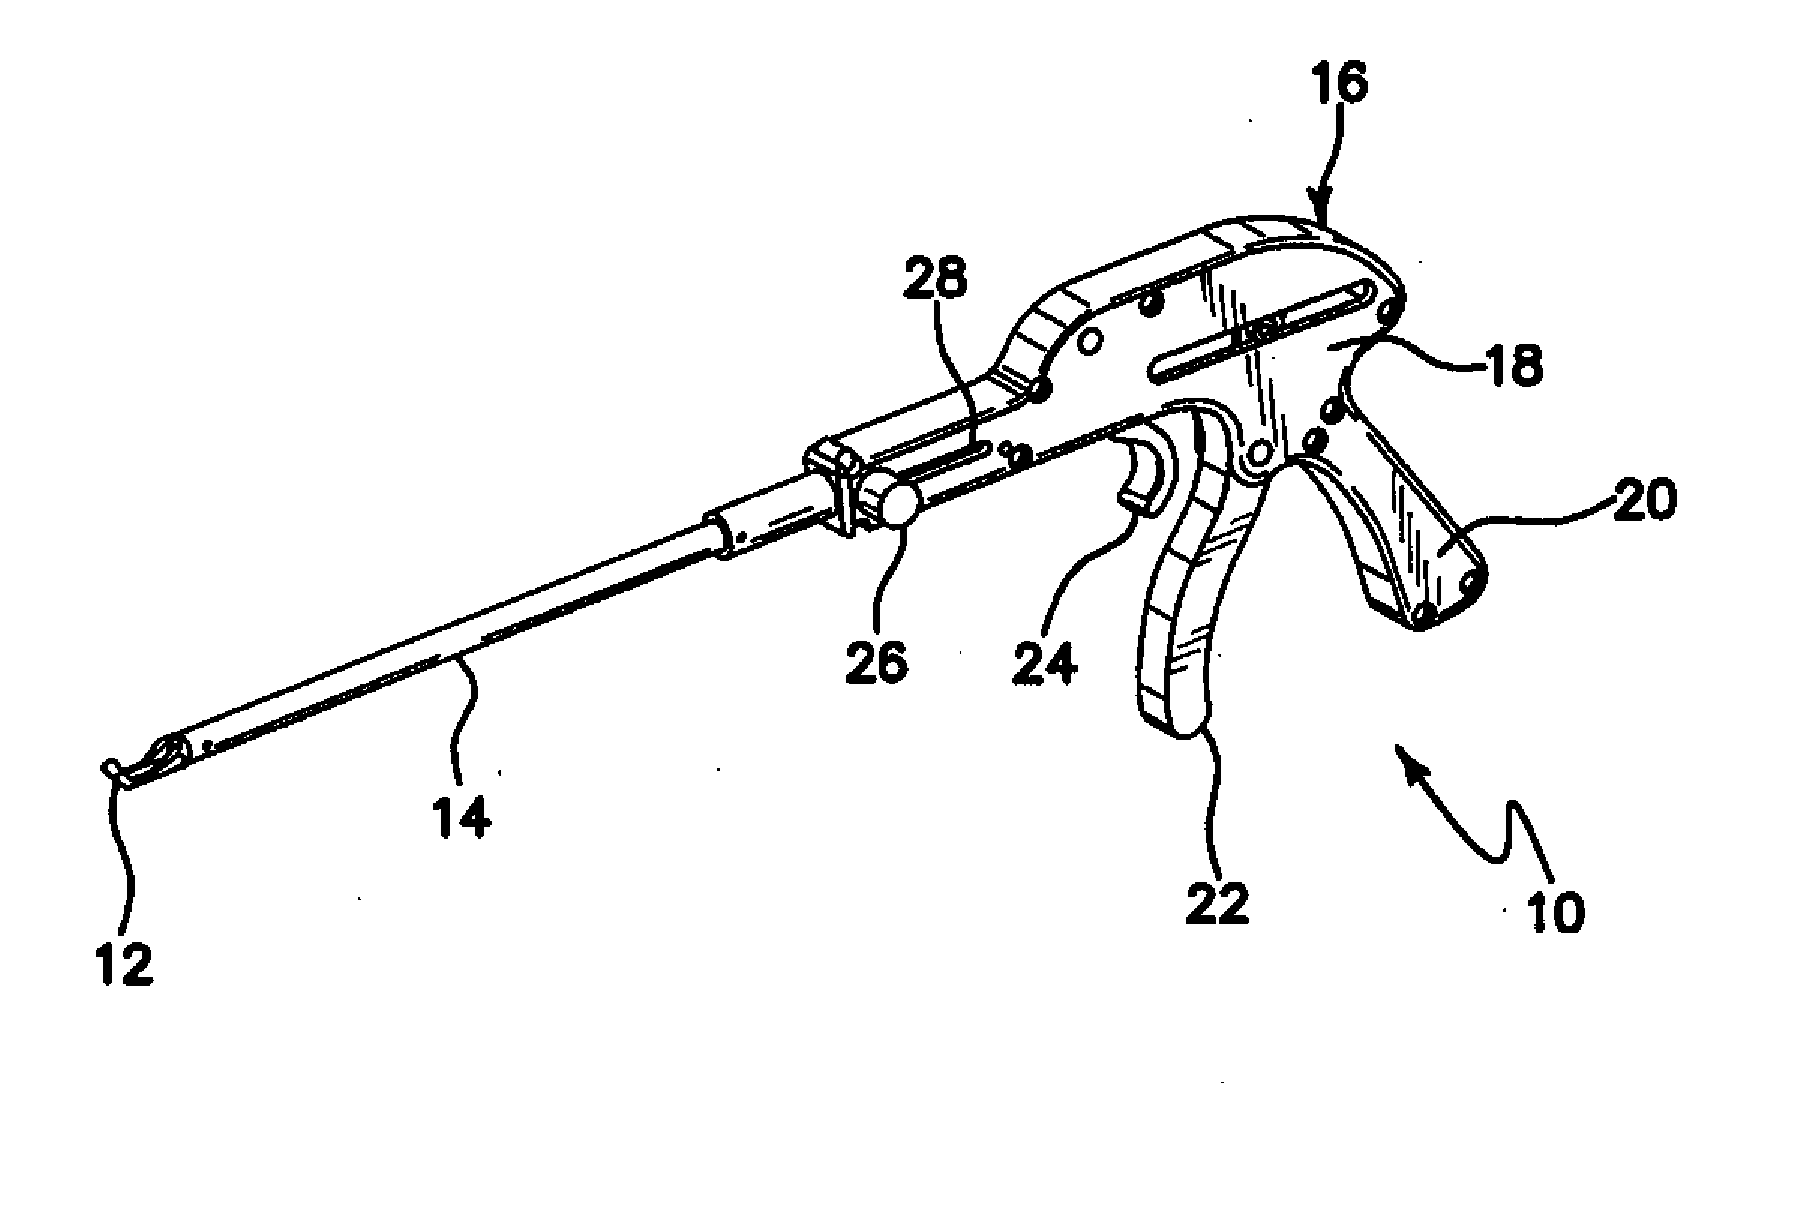 Arthroscopic soft tissue plication systems and methods